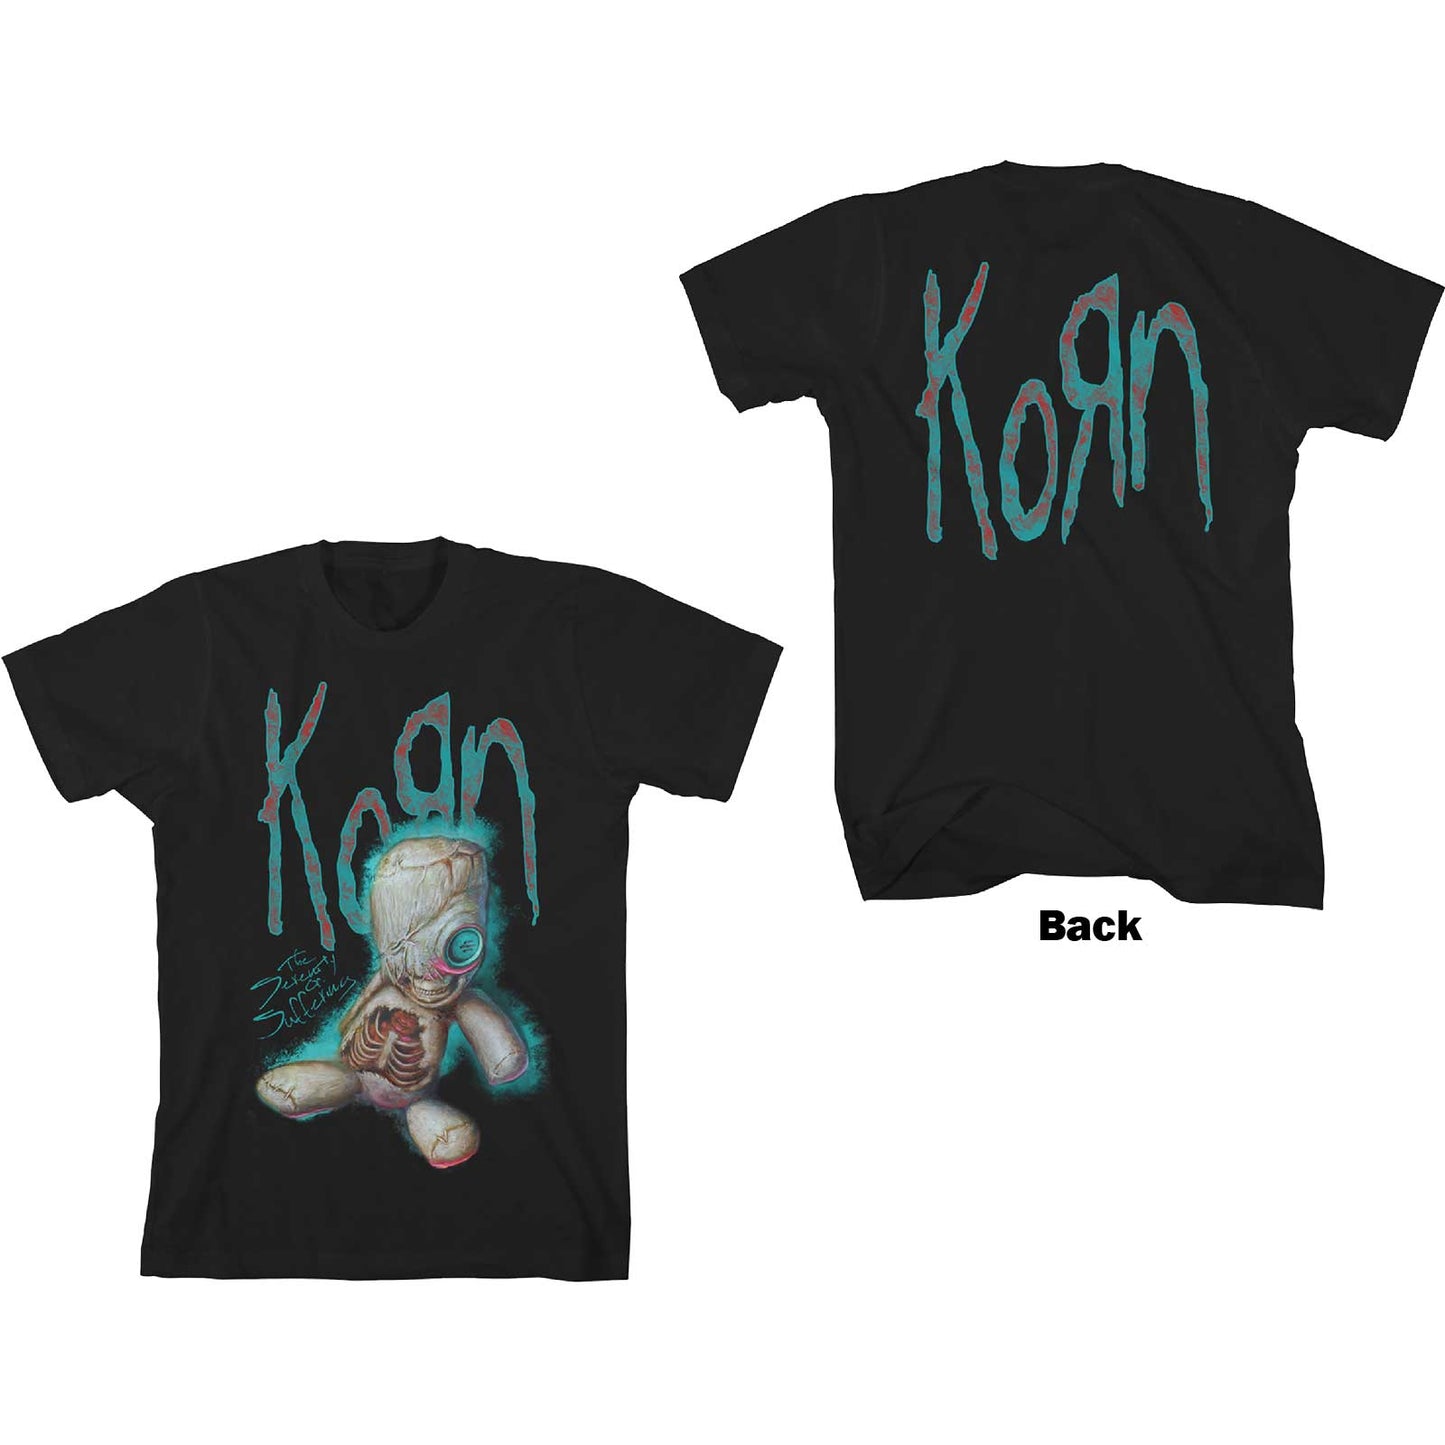 Korn T-Shirt - SOS Doll With Back Print (Unisex) - Front & Back